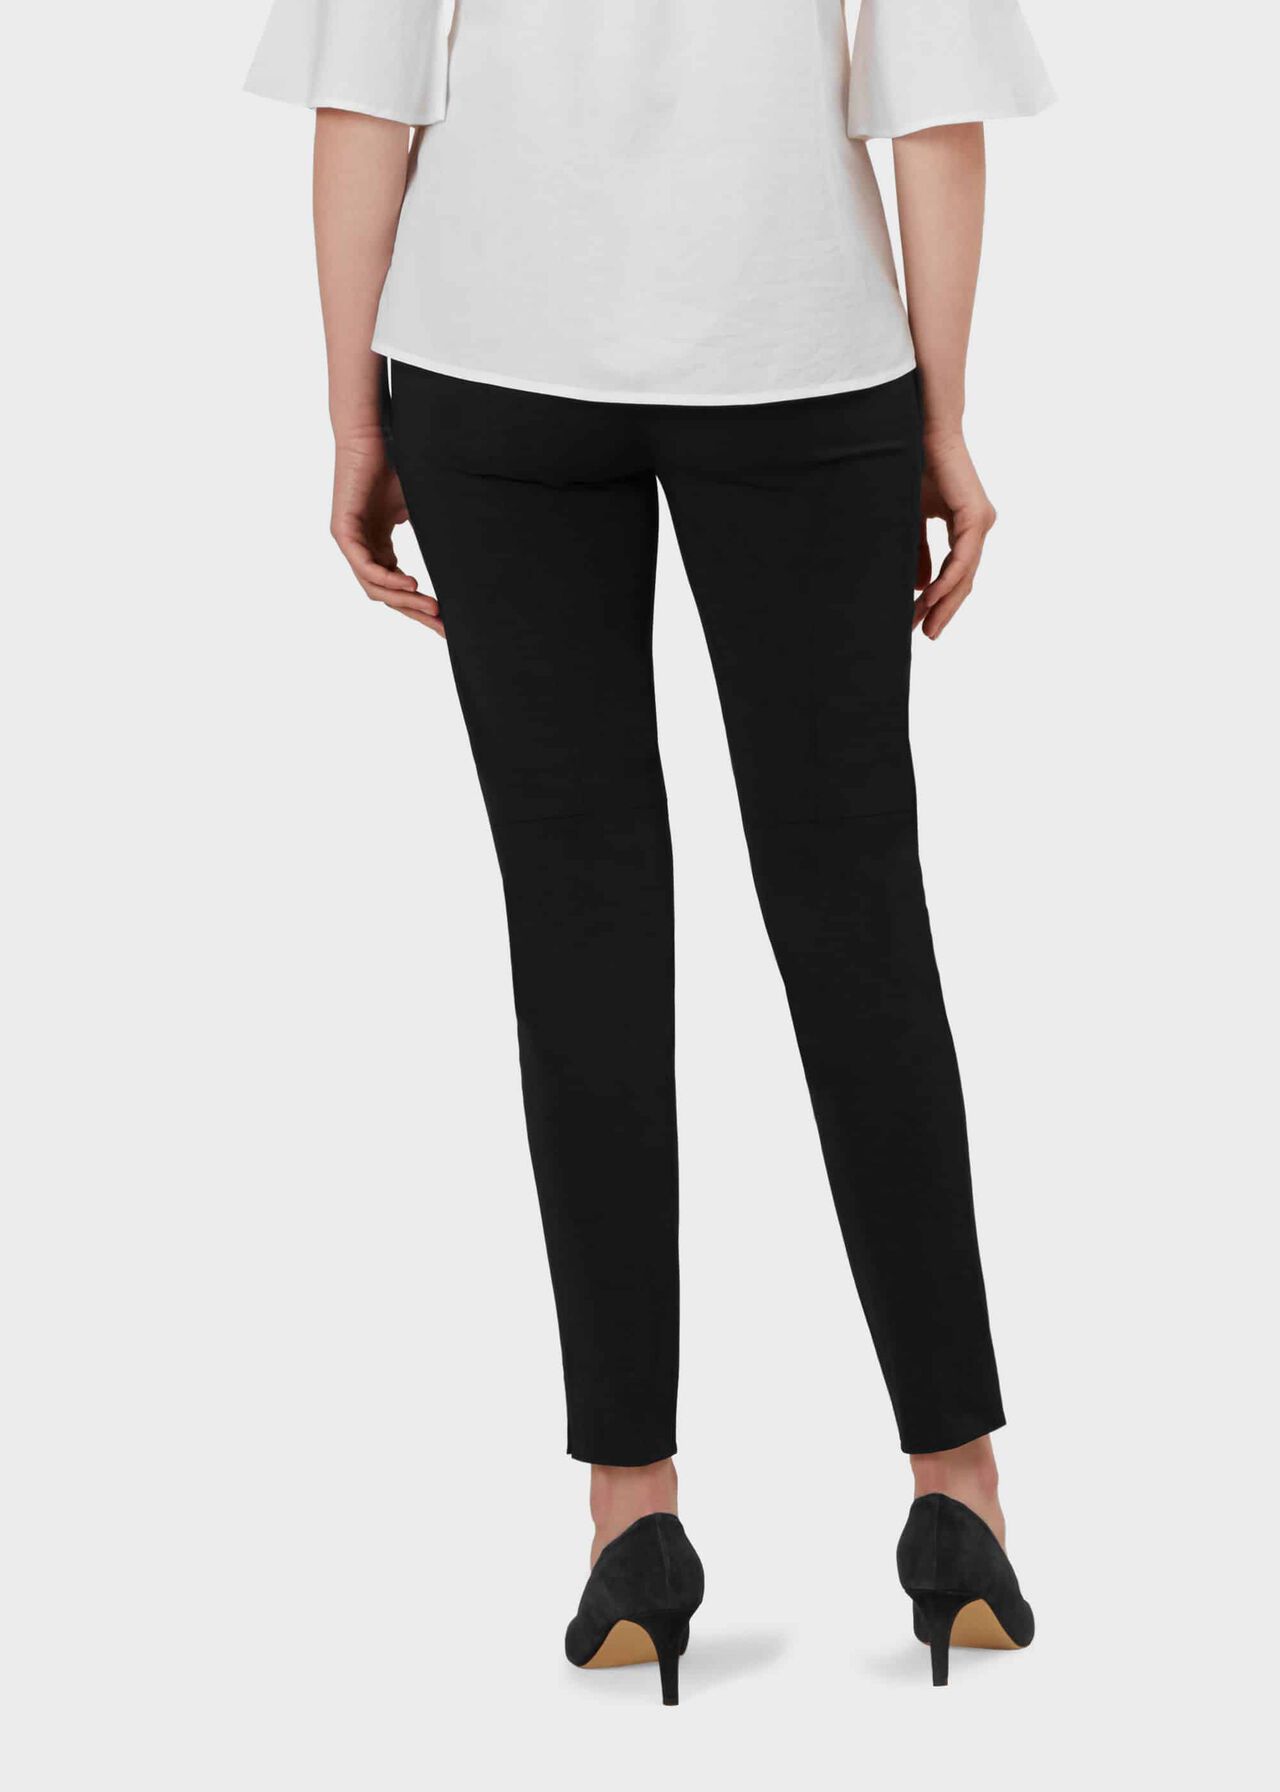 Adrianna Pants With Stretch, Black, hi-res